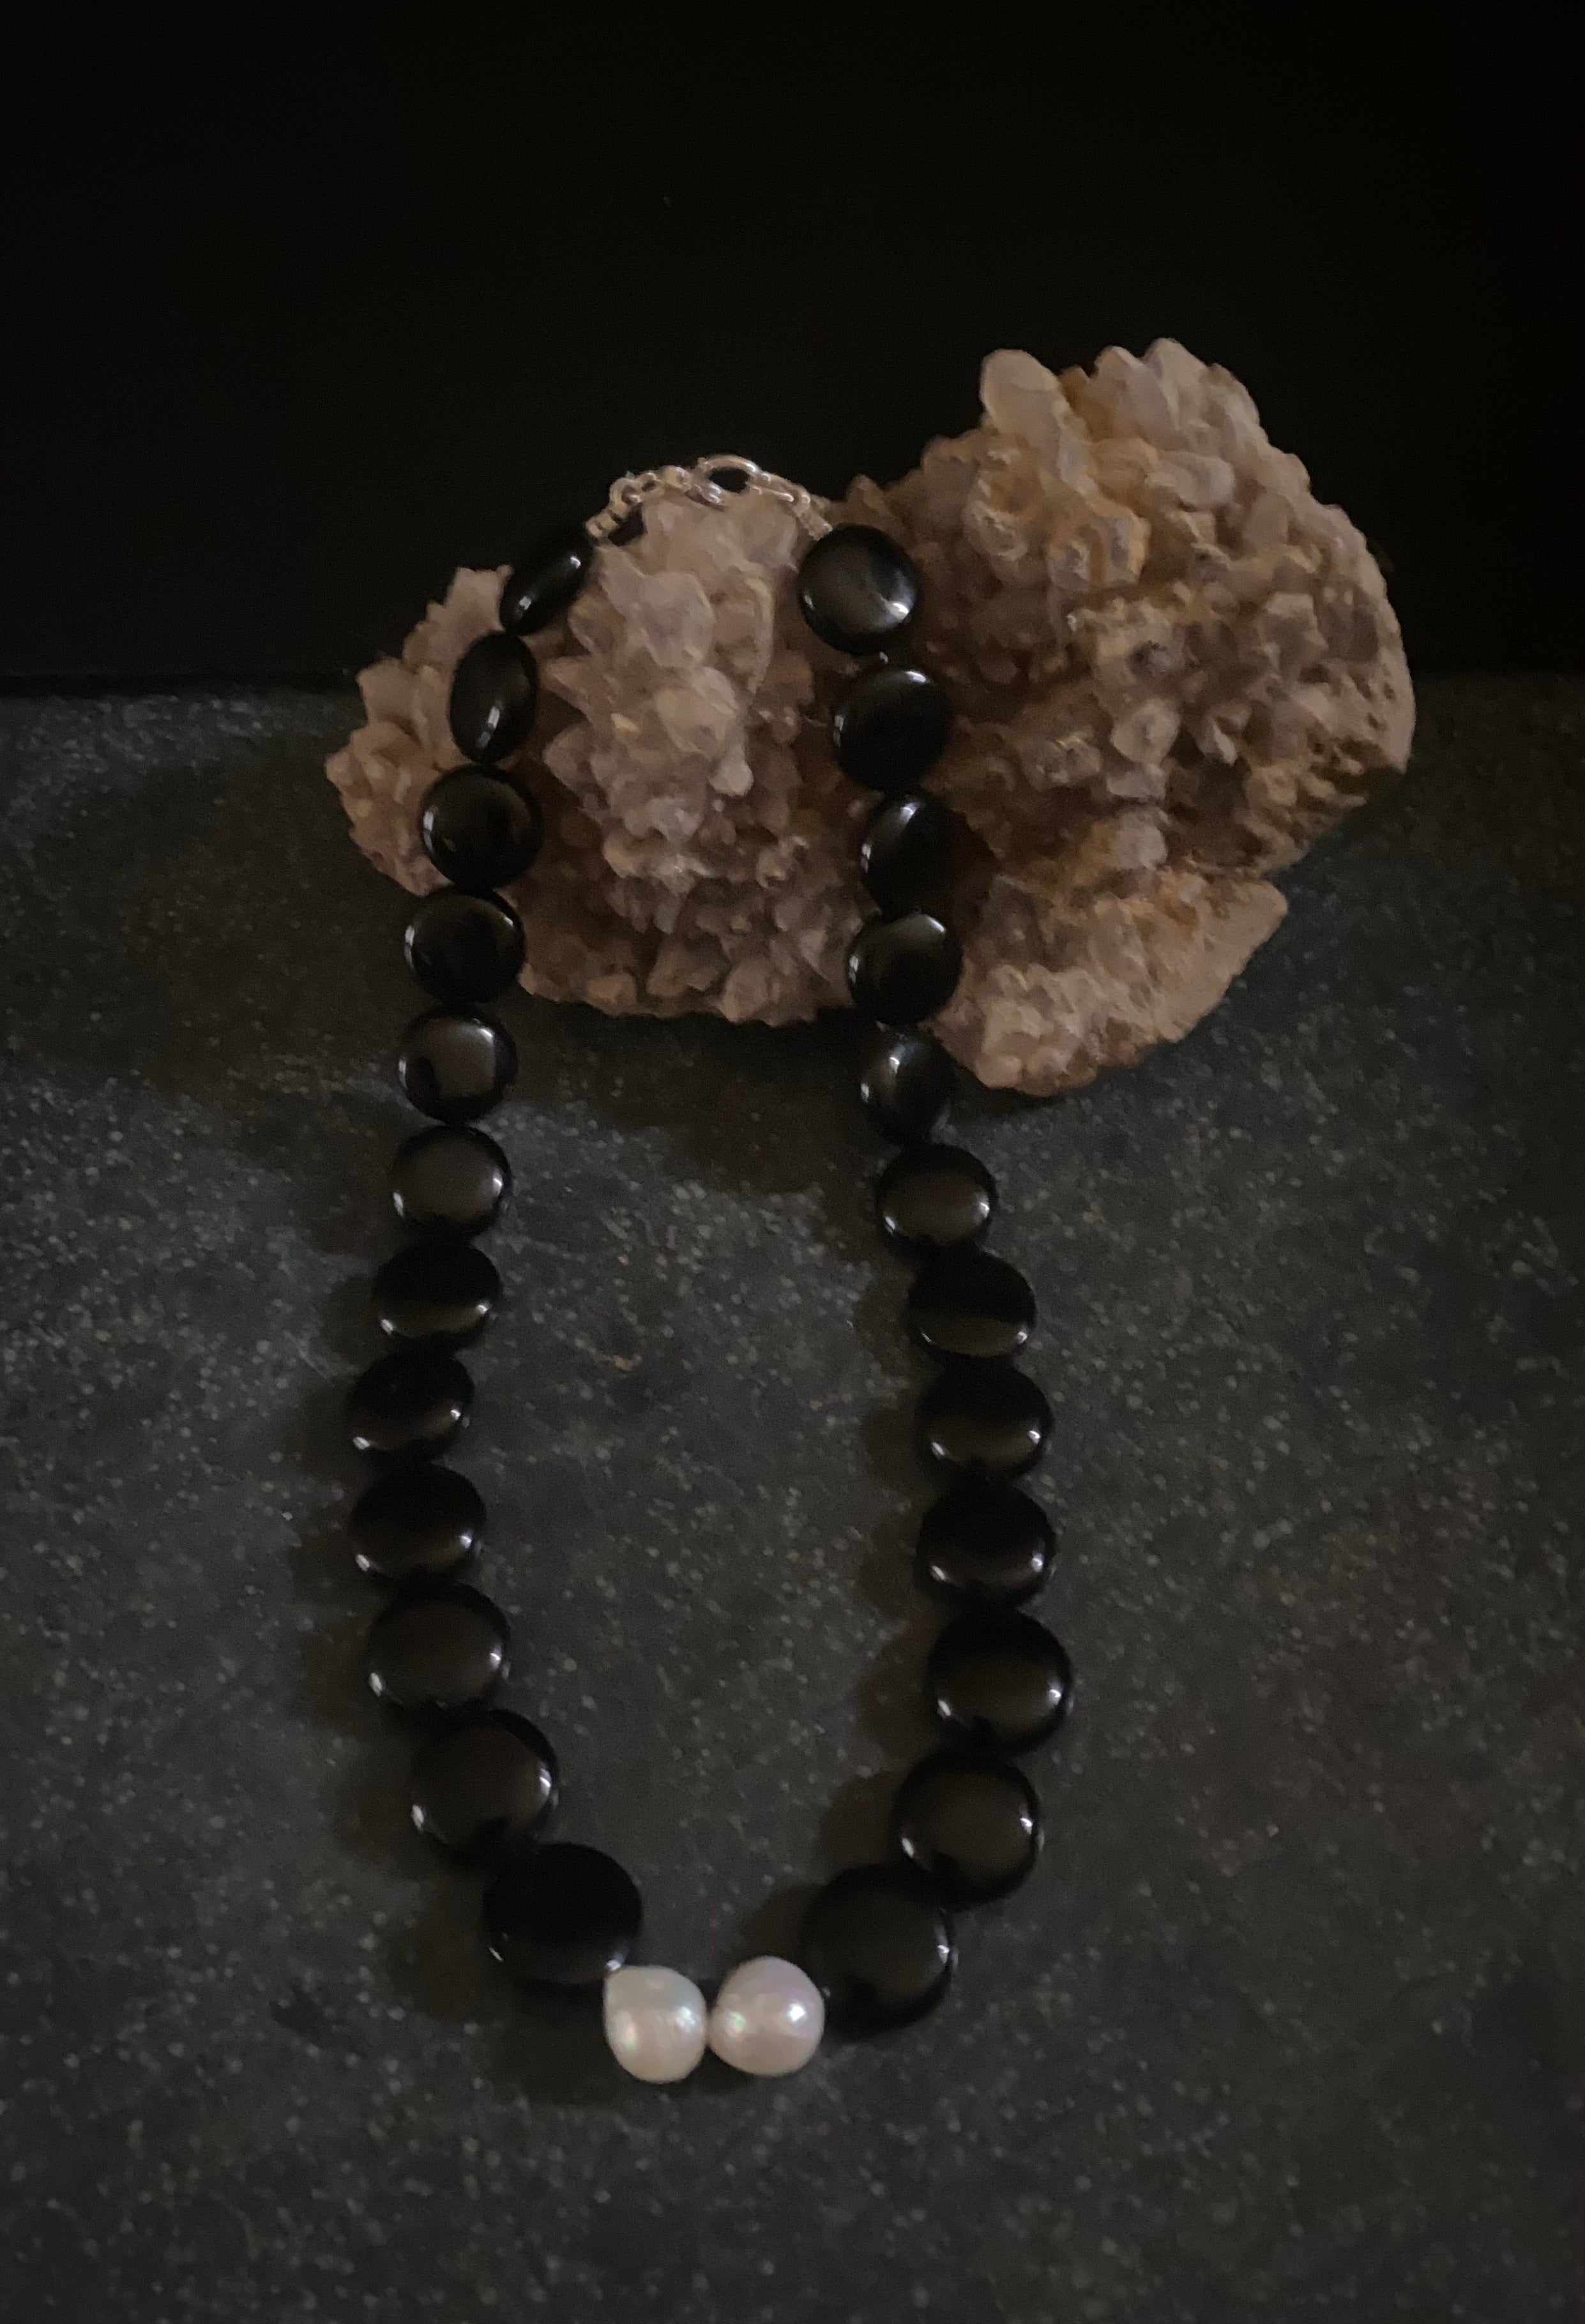 Coin Onyx Necklace/Baroque Pearls